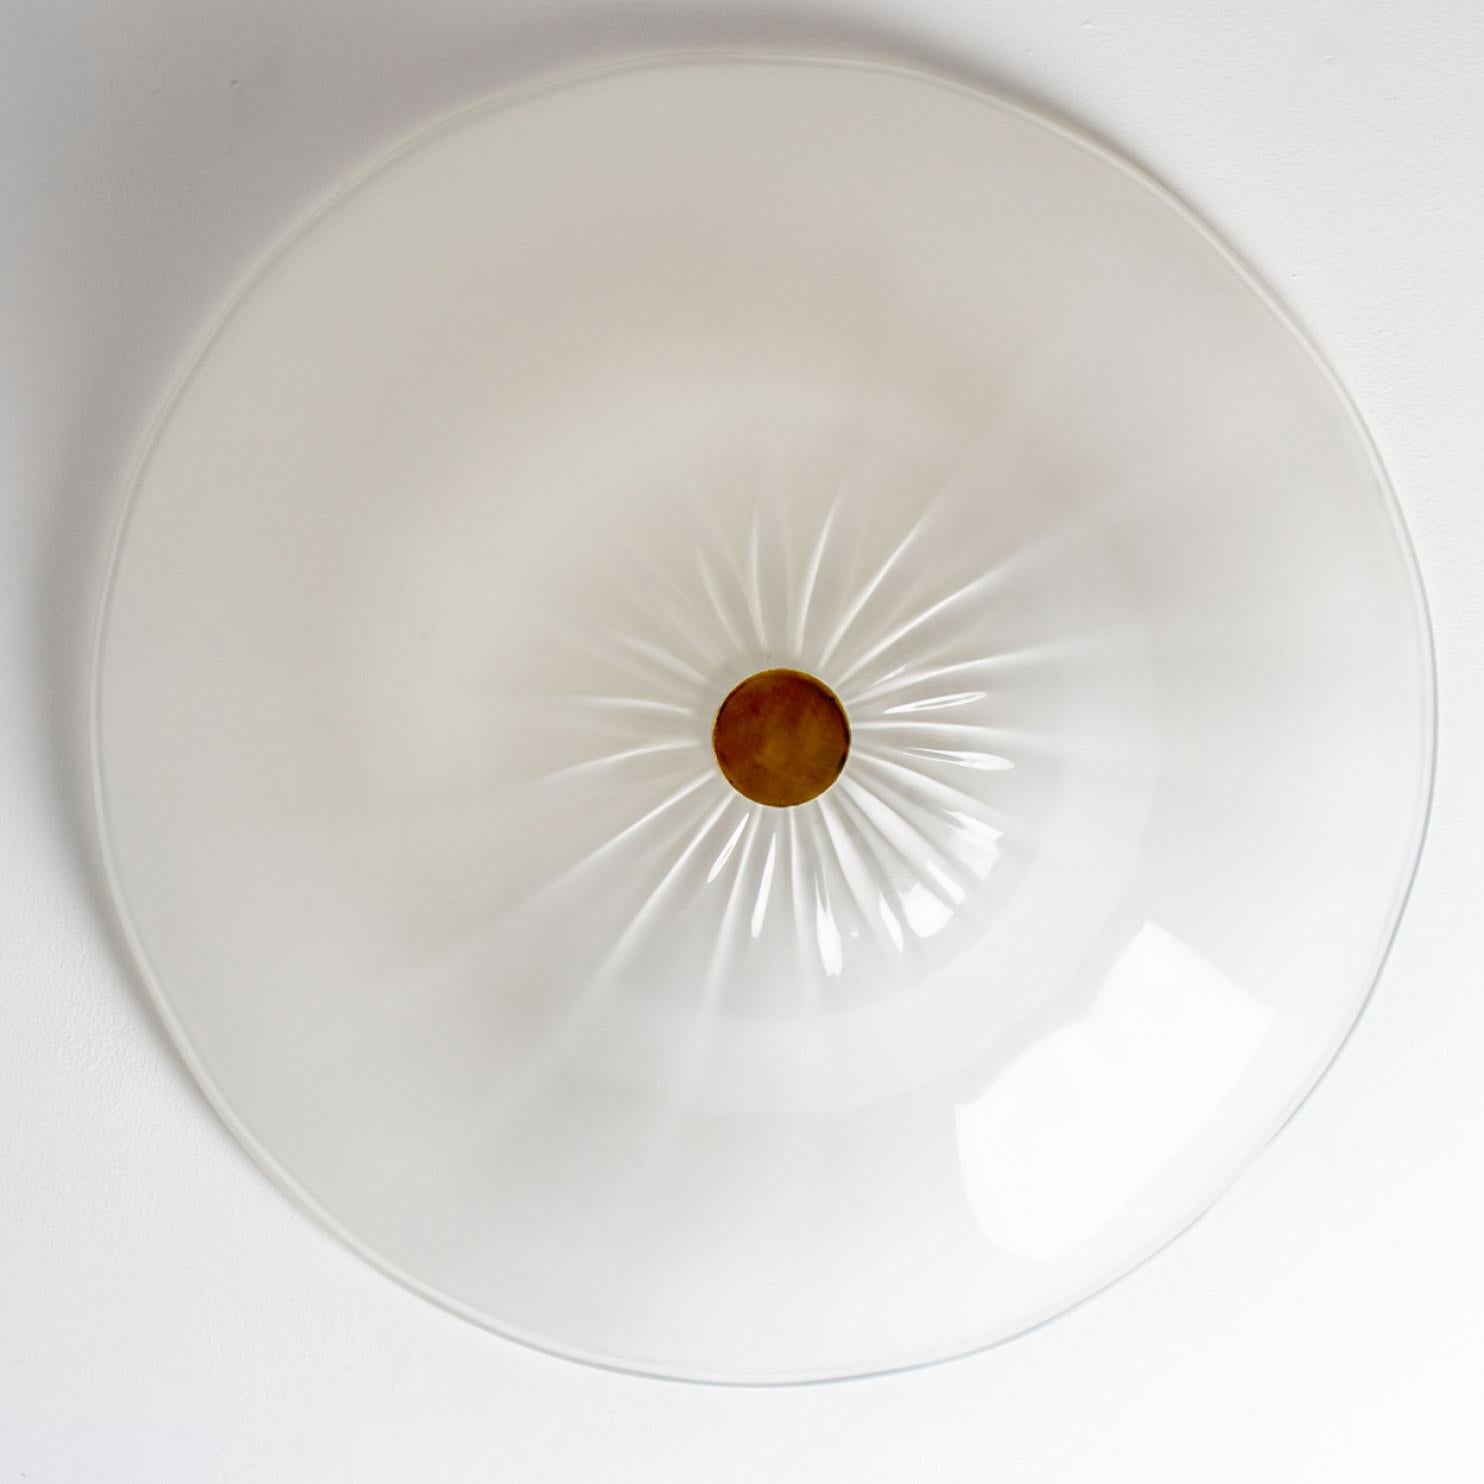 Large beautiful flush mount by J.T Kalmar. Manufactured in Austria, Europe, around 1970. Very elegant shape in white opaline glass.
The fixture shows a brass detail in the middle of the light. It fills the room with a soft, warm glow.

The flush